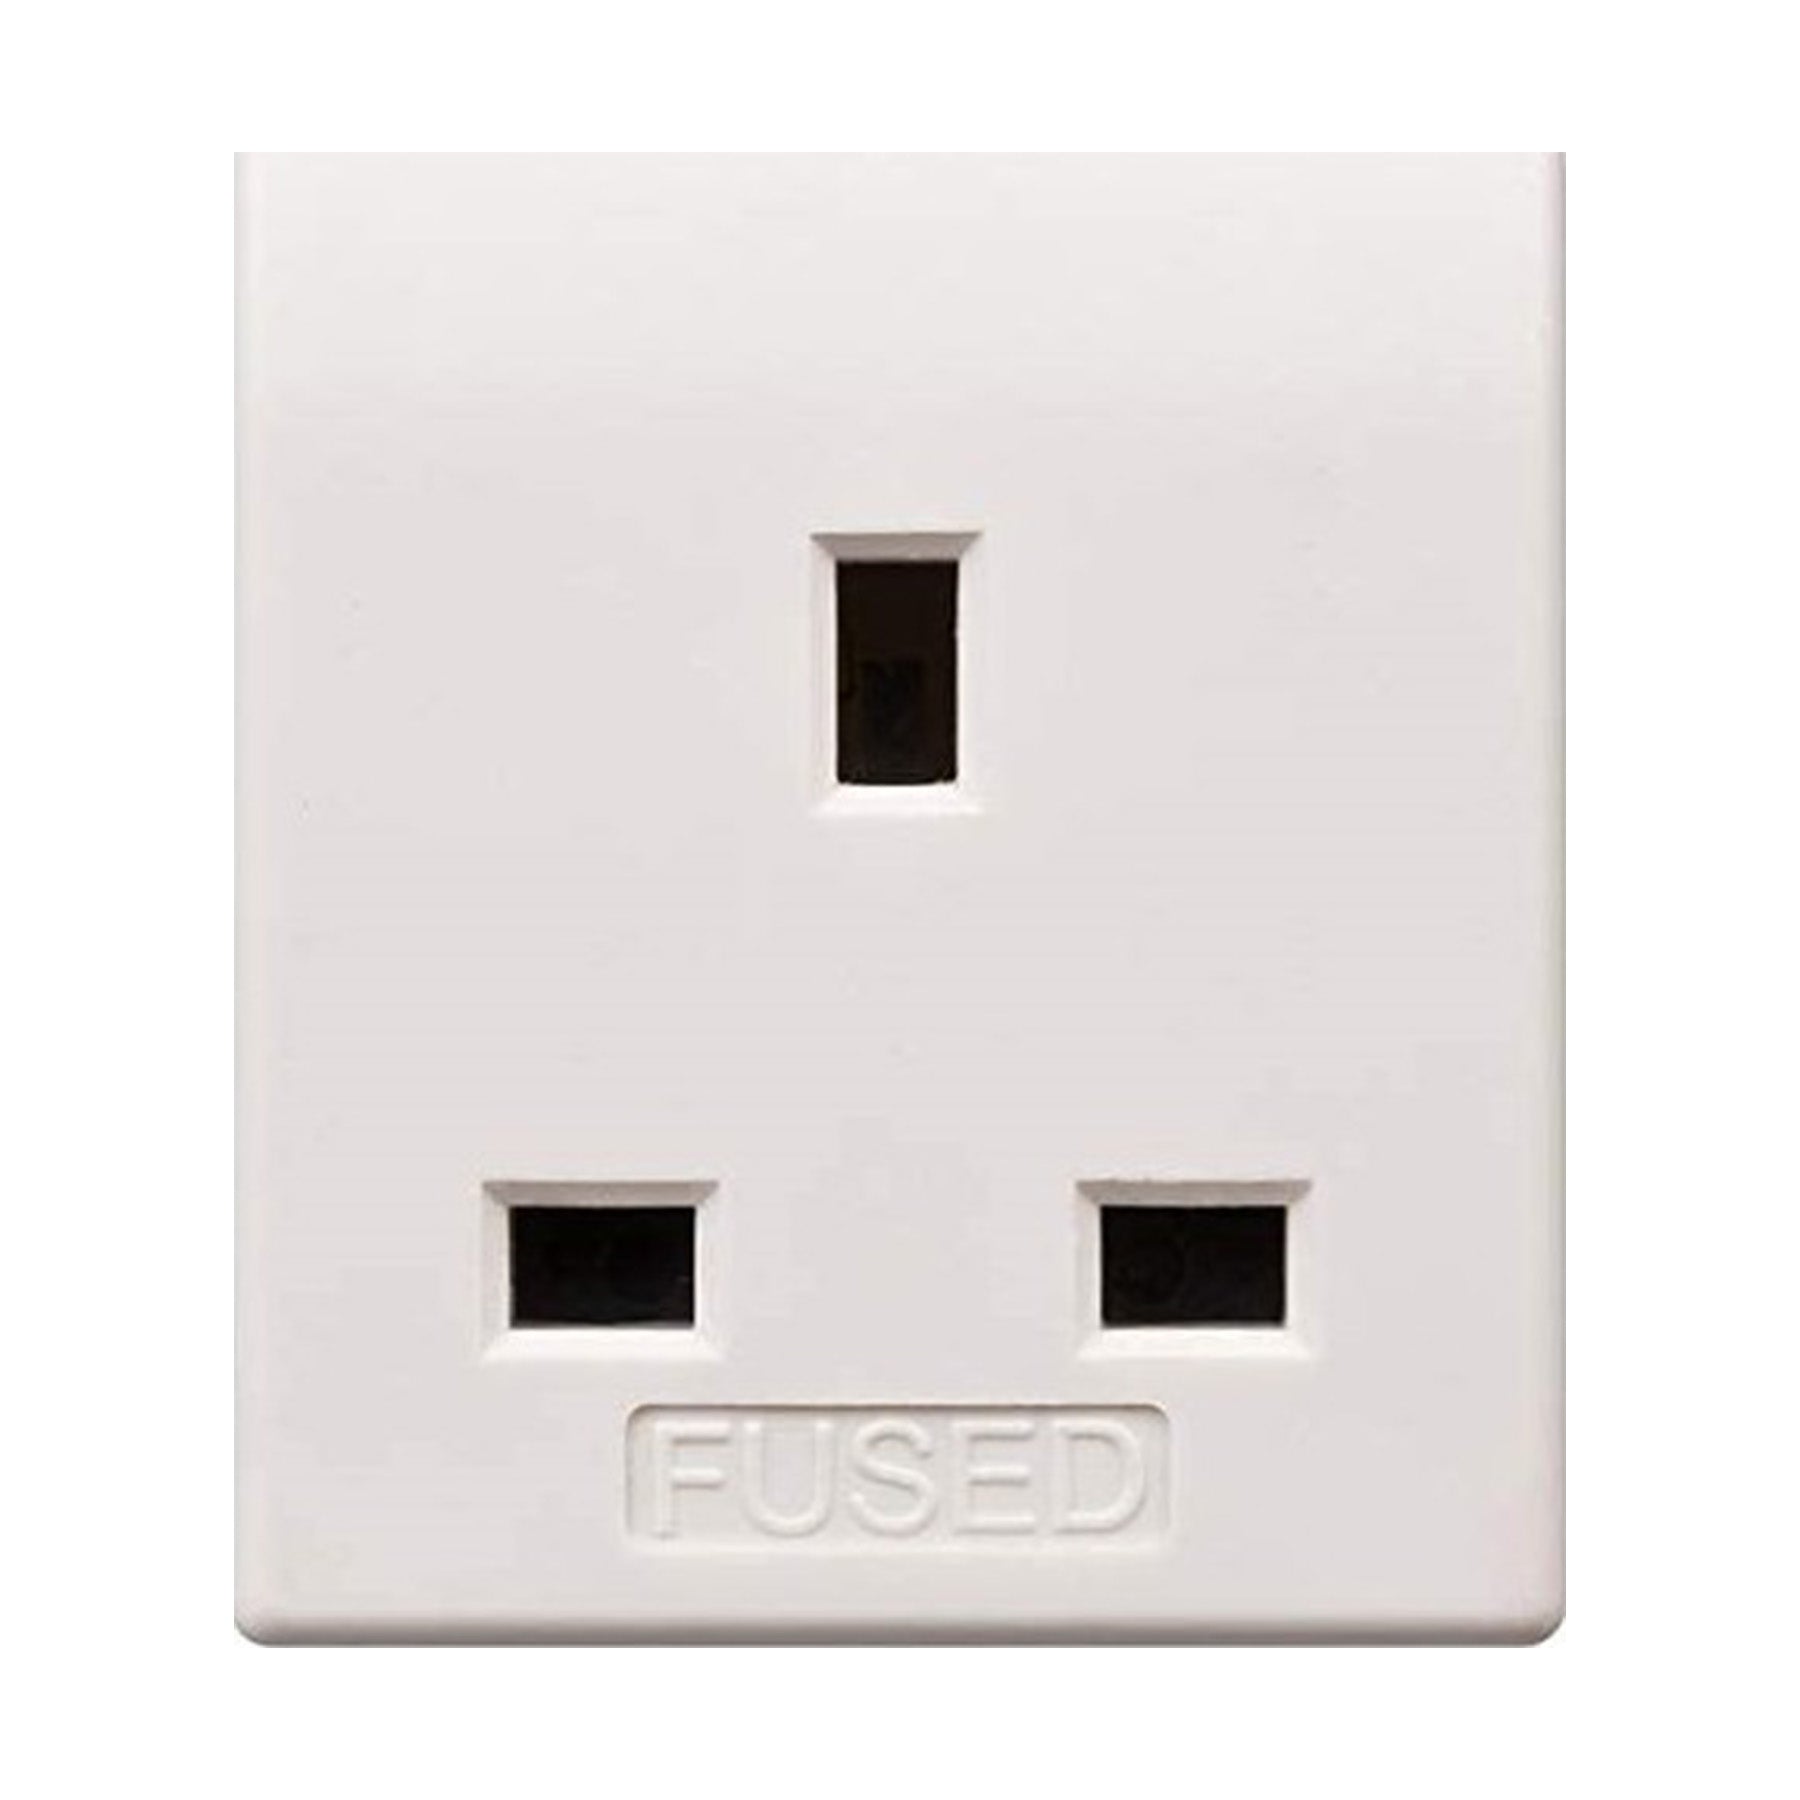 Adaptor with 3 Sockets , White Color